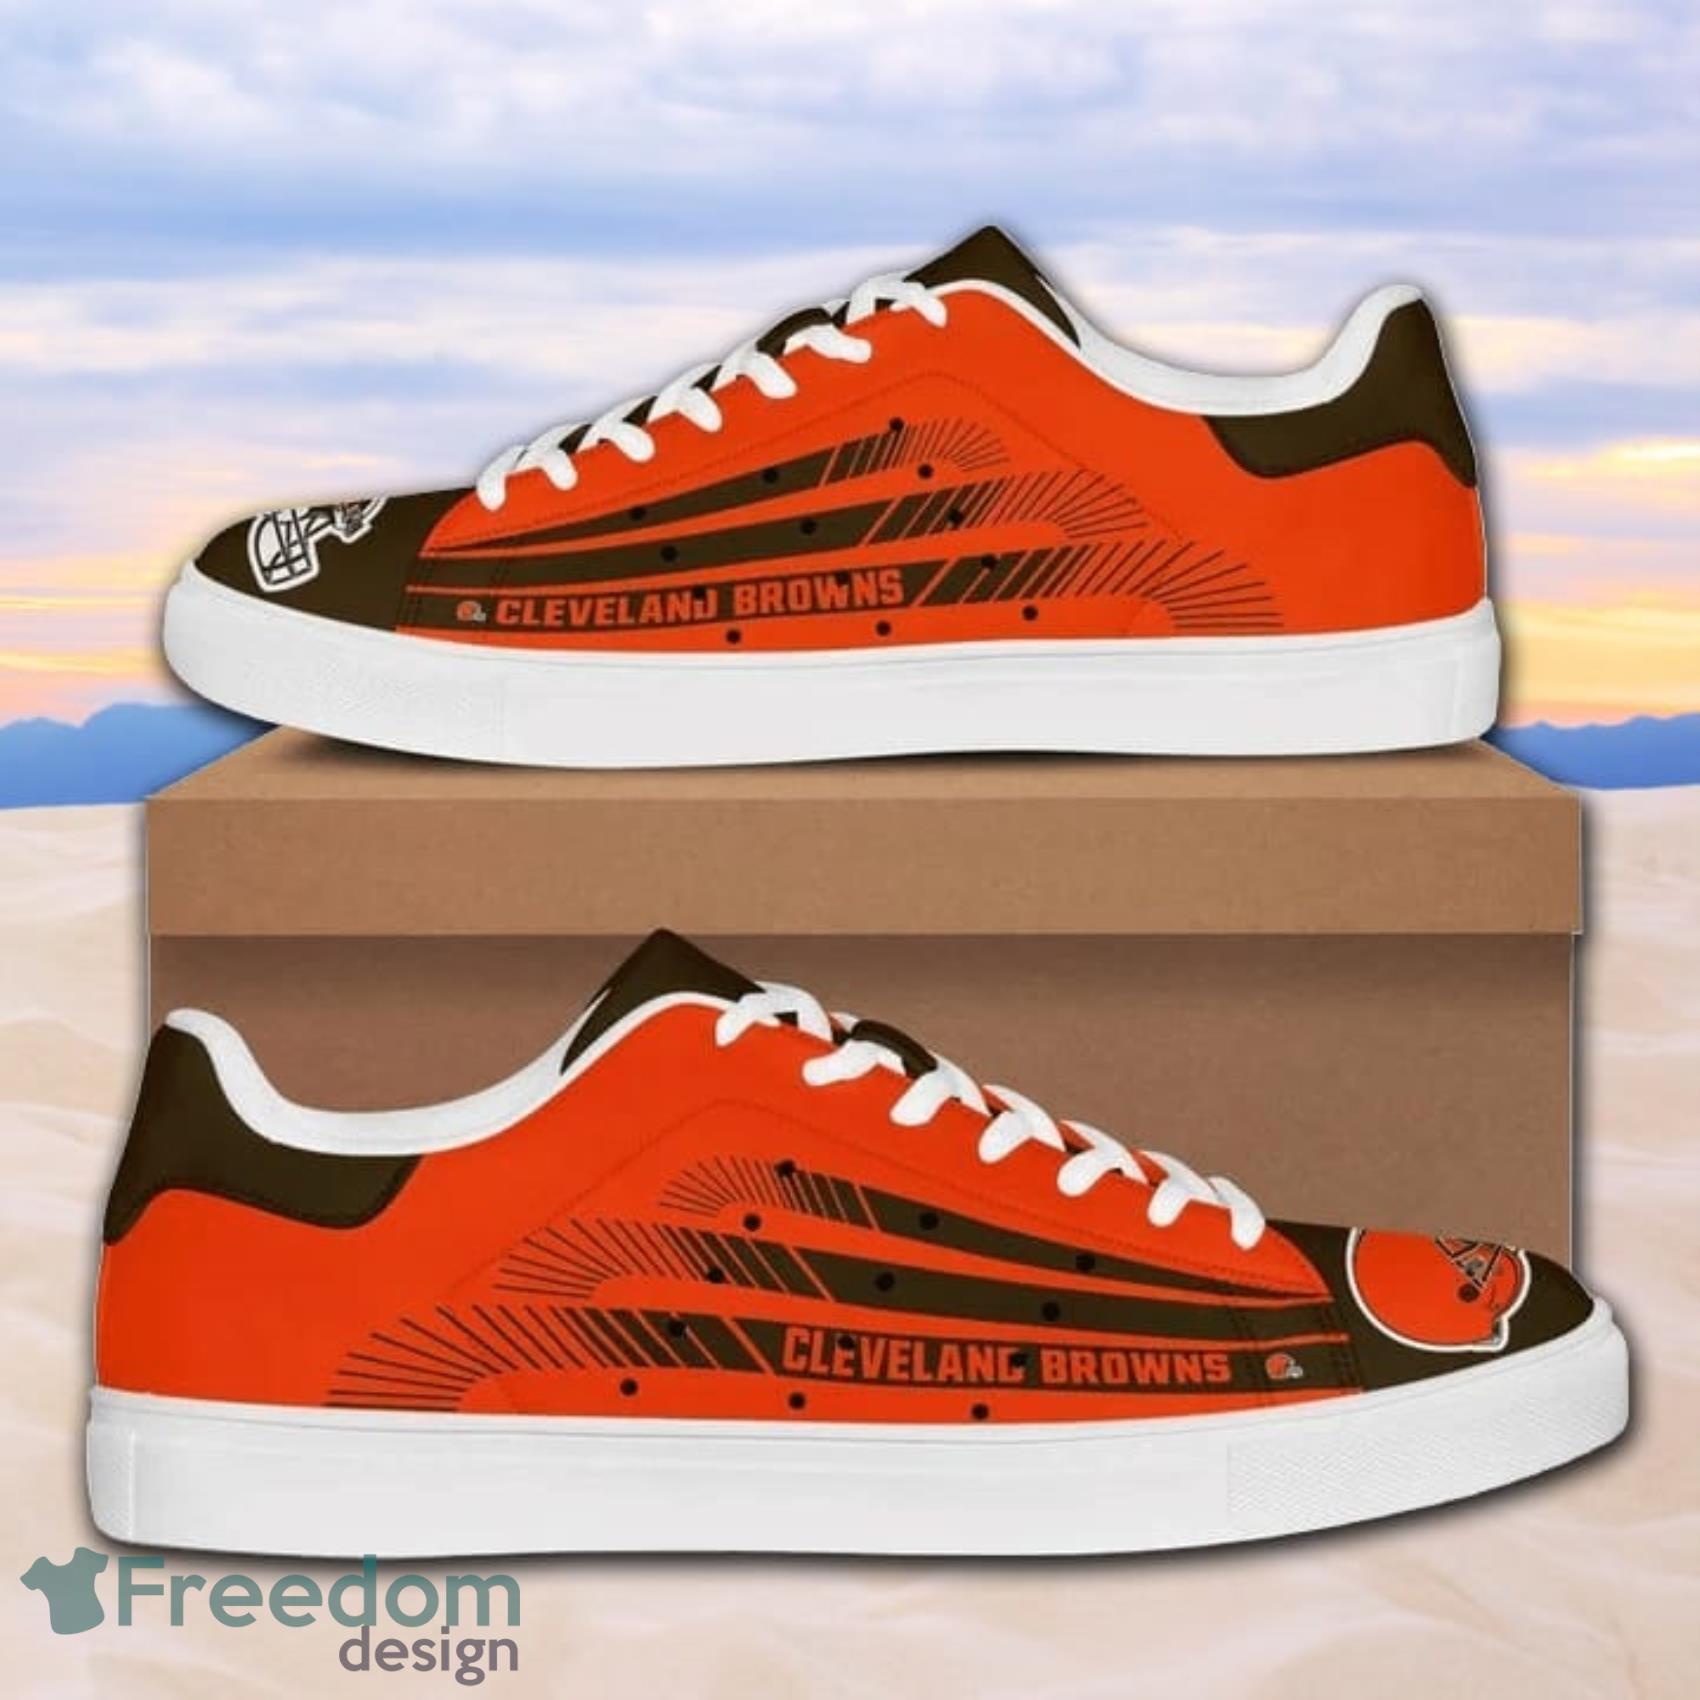 Cleveland Browns NFL Logo Low Top Skate Shoes For Men And Women -  Freedomdesign